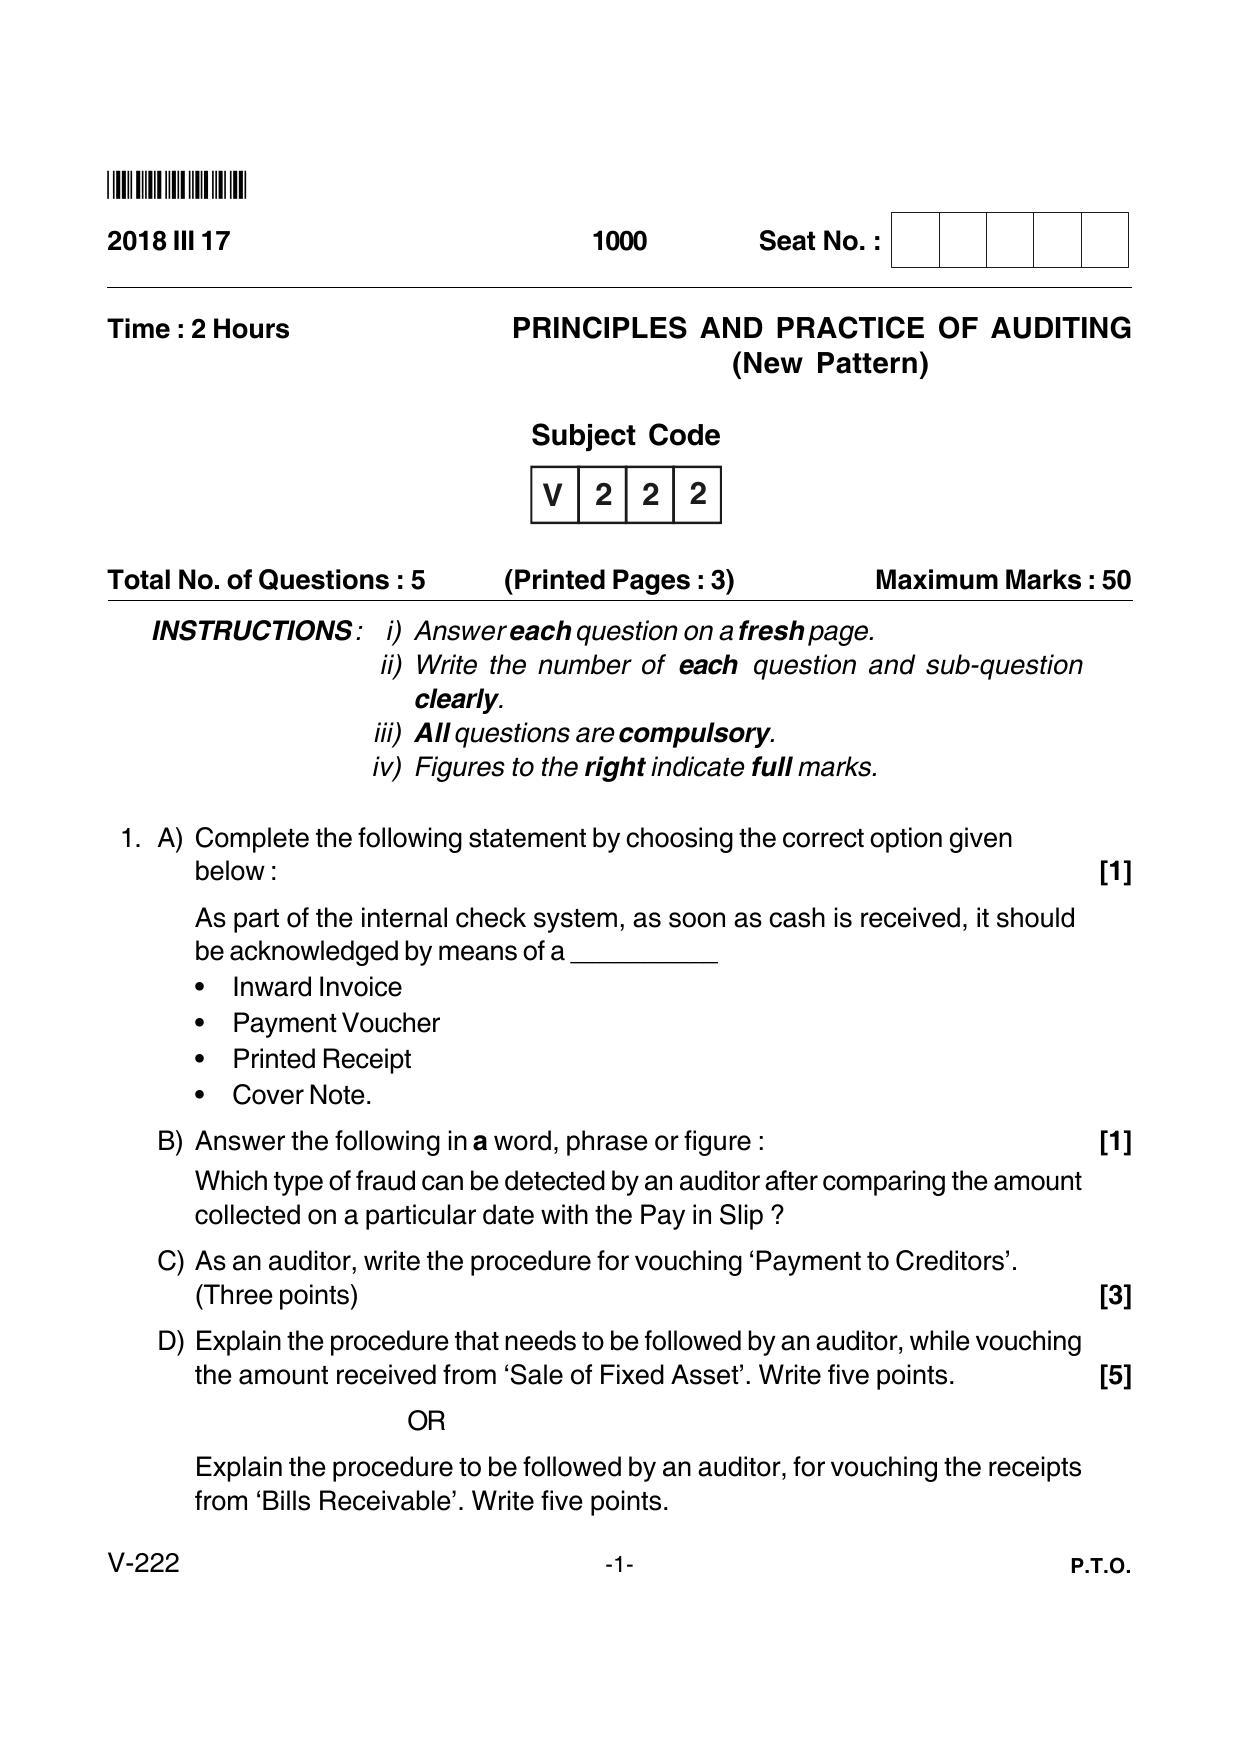 Goa Board Class 12 Principles & Practice of Auditing  Voc 222 New Pattern (March 2018) Question Paper - Page 1